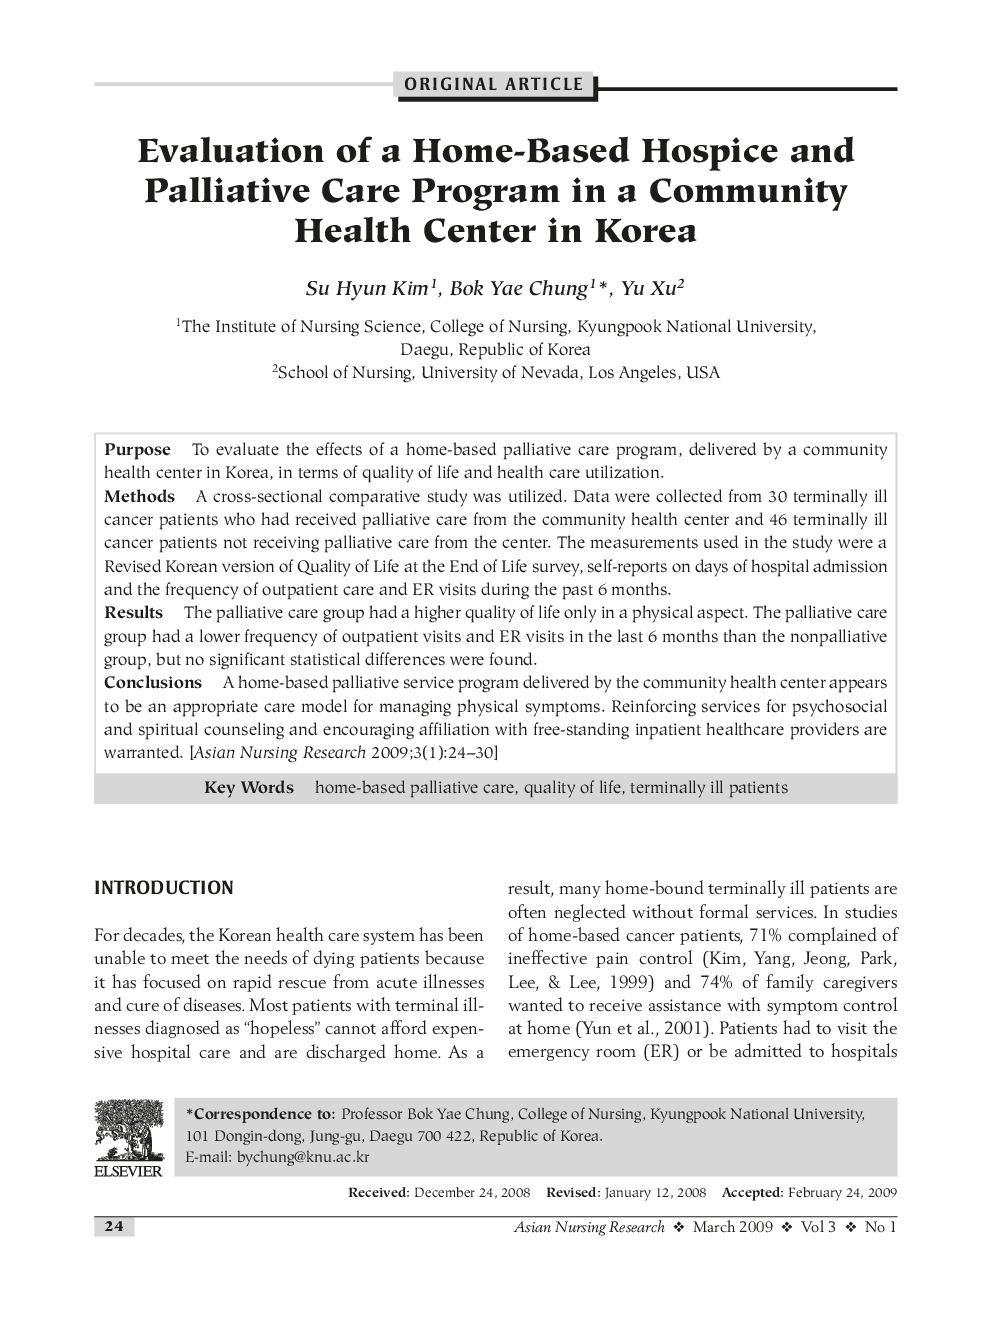 Evaluation of a Home-Based Hospice and Palliative Care Program in a Community Health Center in Korea